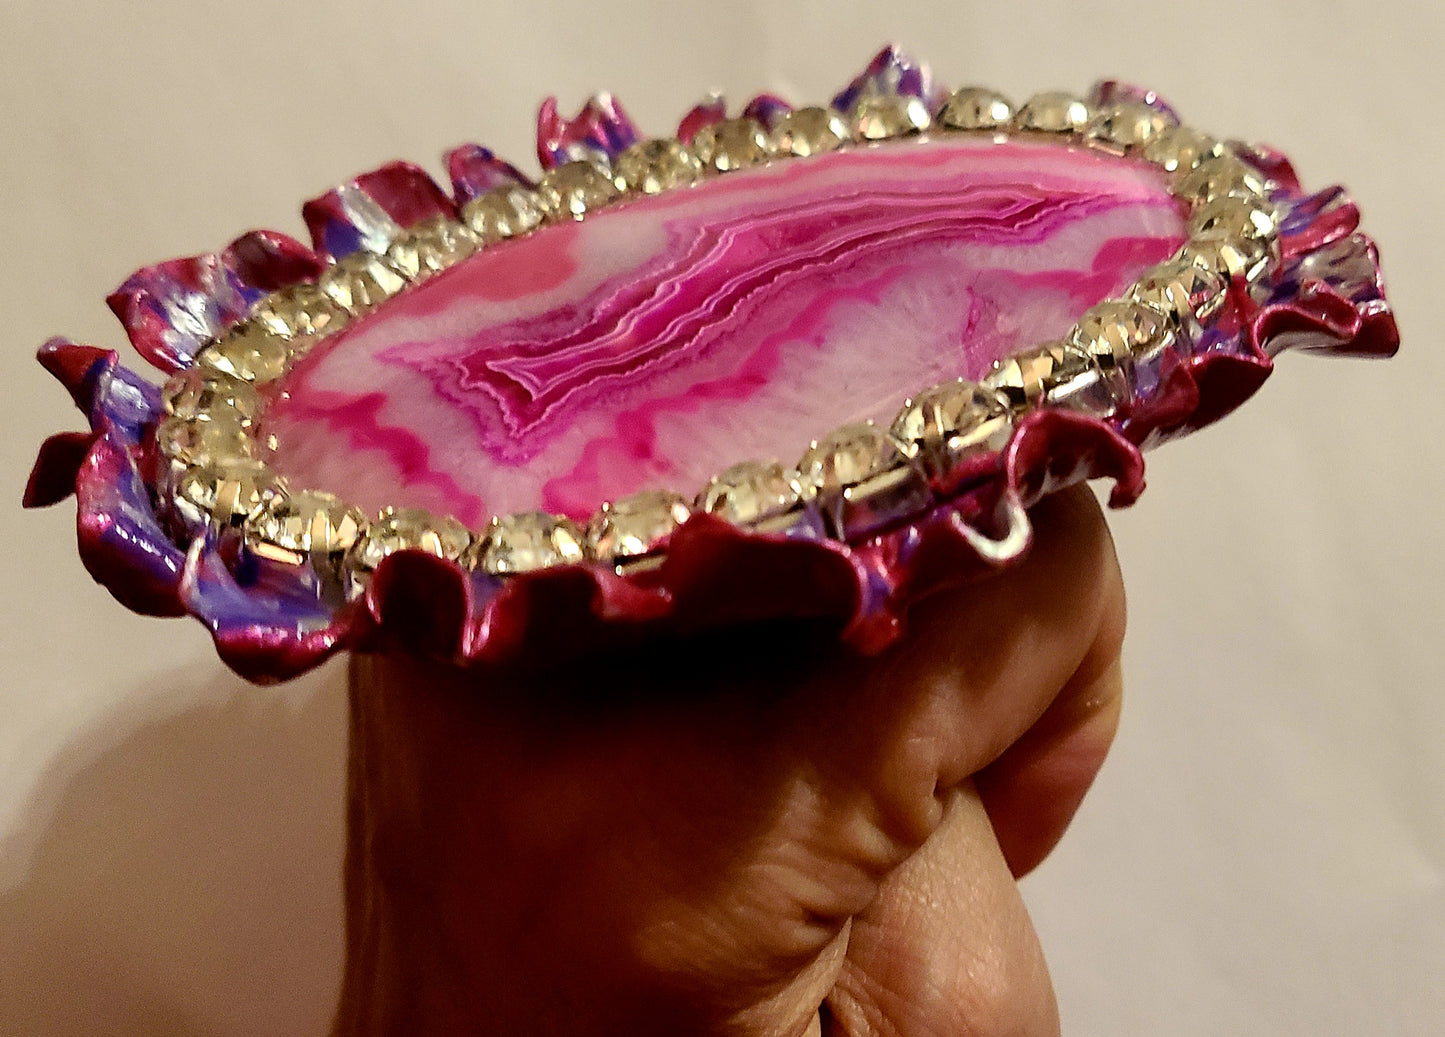 Oversized Hot Pink Druzy Agate Adjustable Hand Sculpted Statement Ring, OOAK Artisan Gemstone Hand Ring Women, Eccentric Finger Candy Accessory